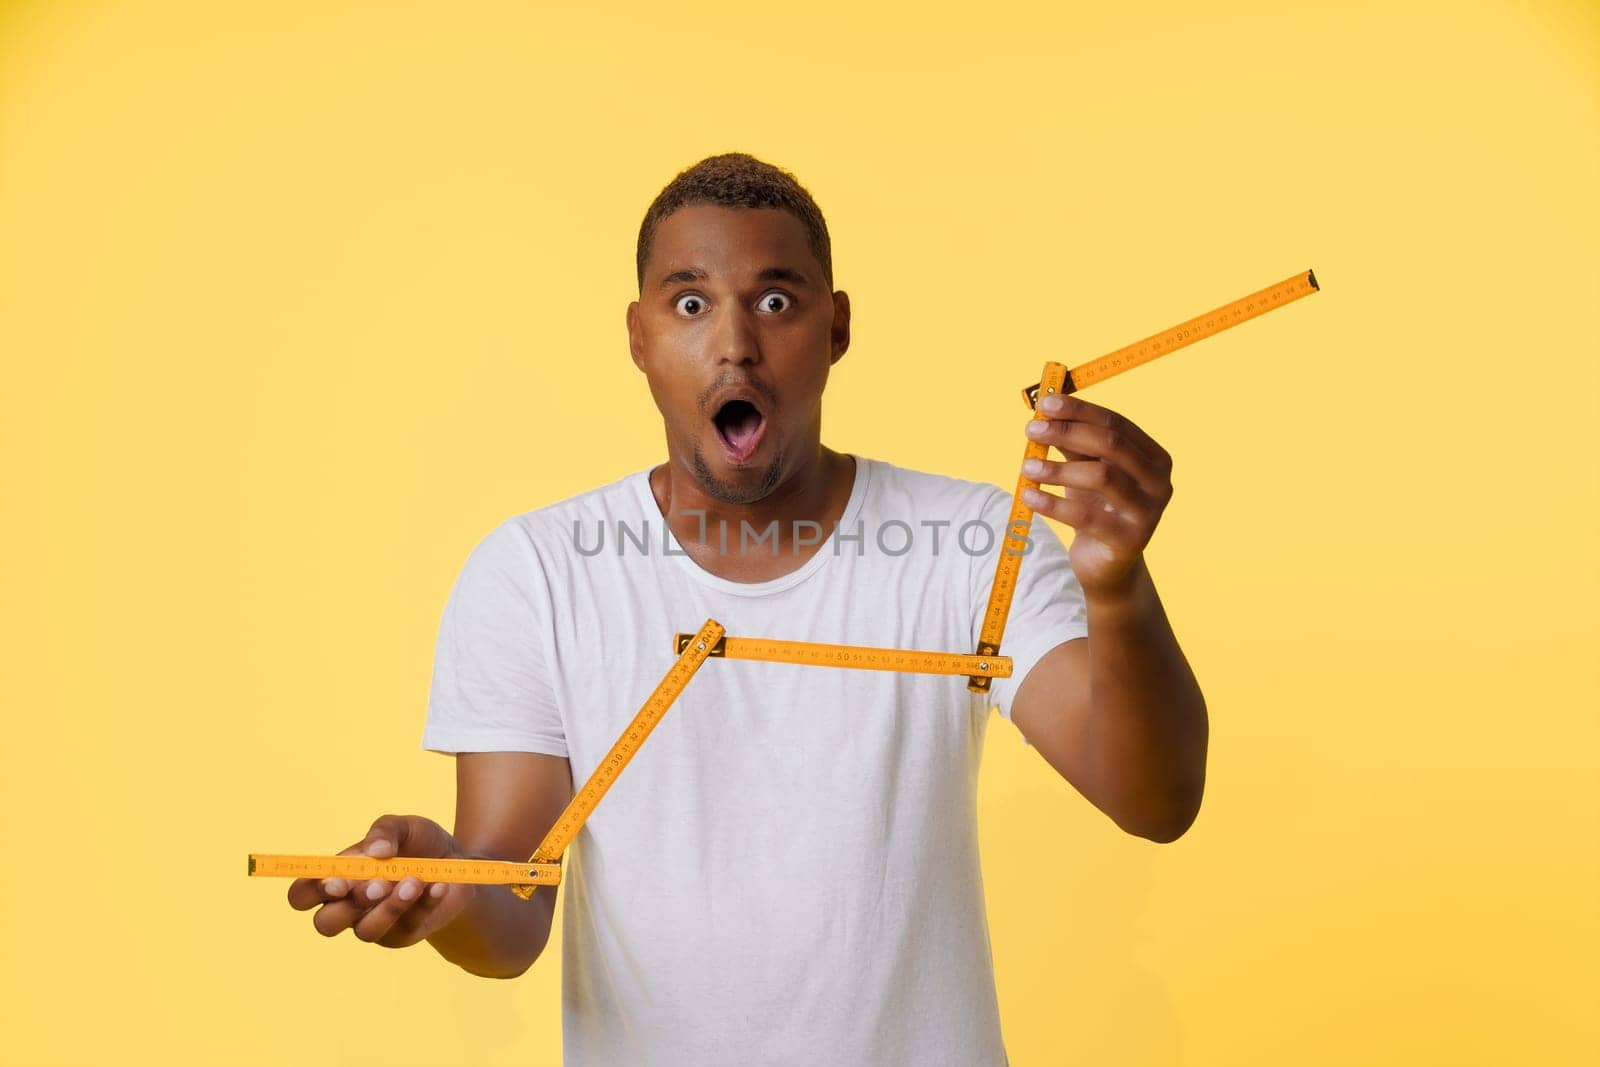 Concept of income growth, amazed African American man holding folding ruler and showing growth chart on the stock exchange. Man is standing on bright yellow background with copy space for designers to add their own text or graphics. High quality photo